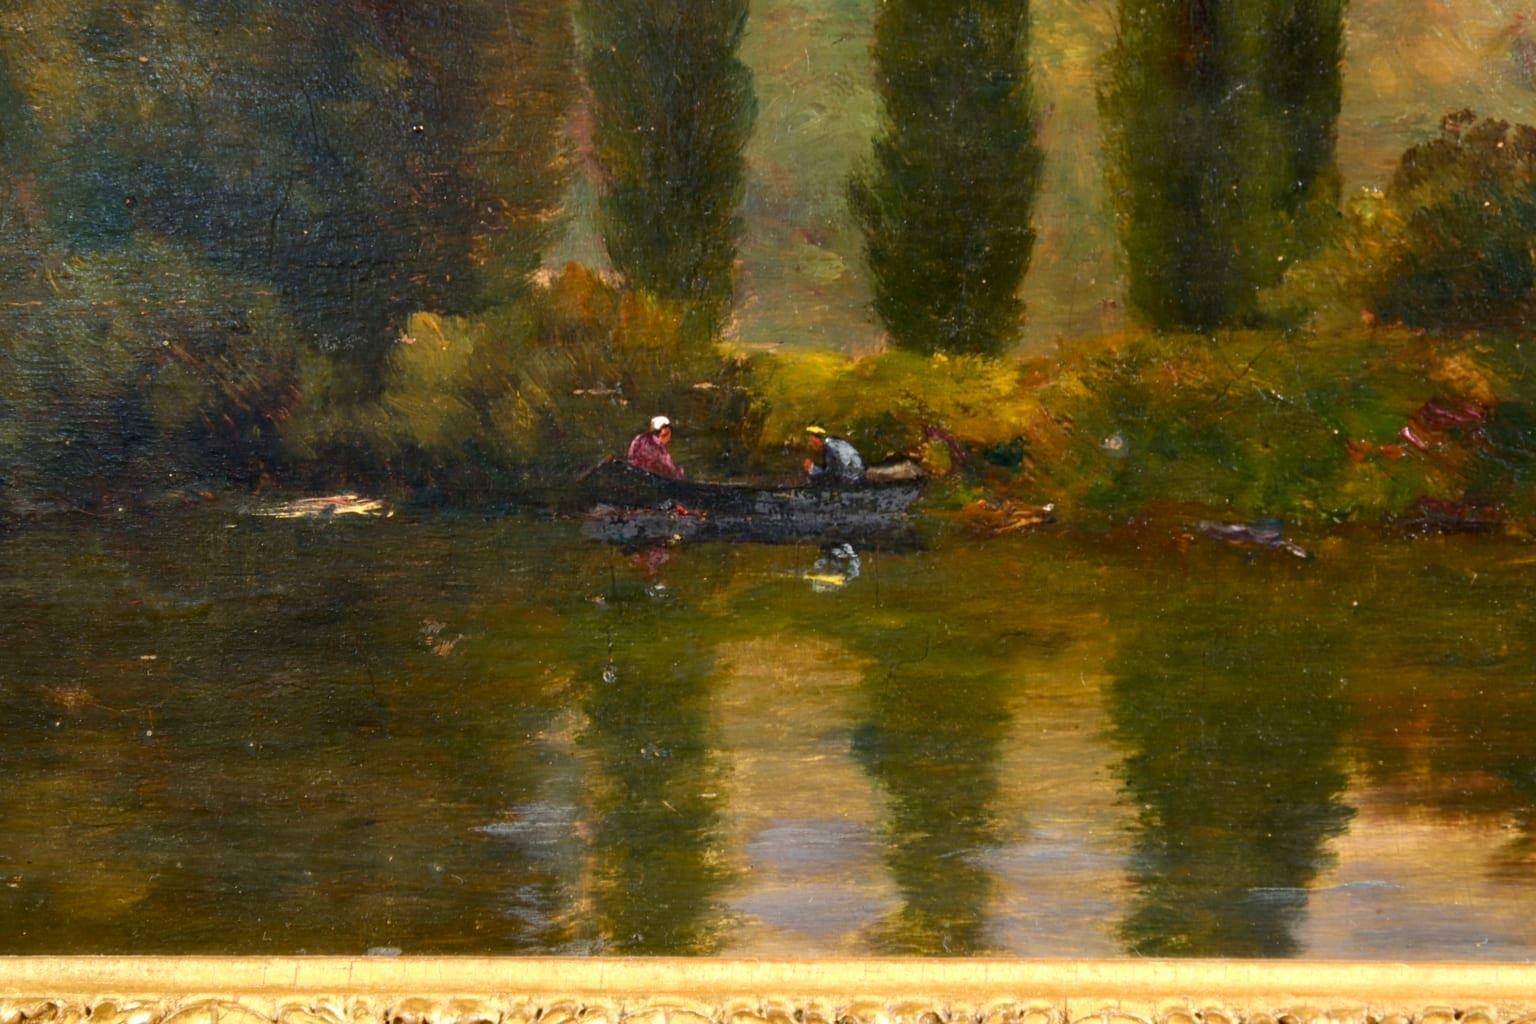 On the Seine - Barbizon Oil, Figures on River in Landscape by Hippolyte Delpy 4